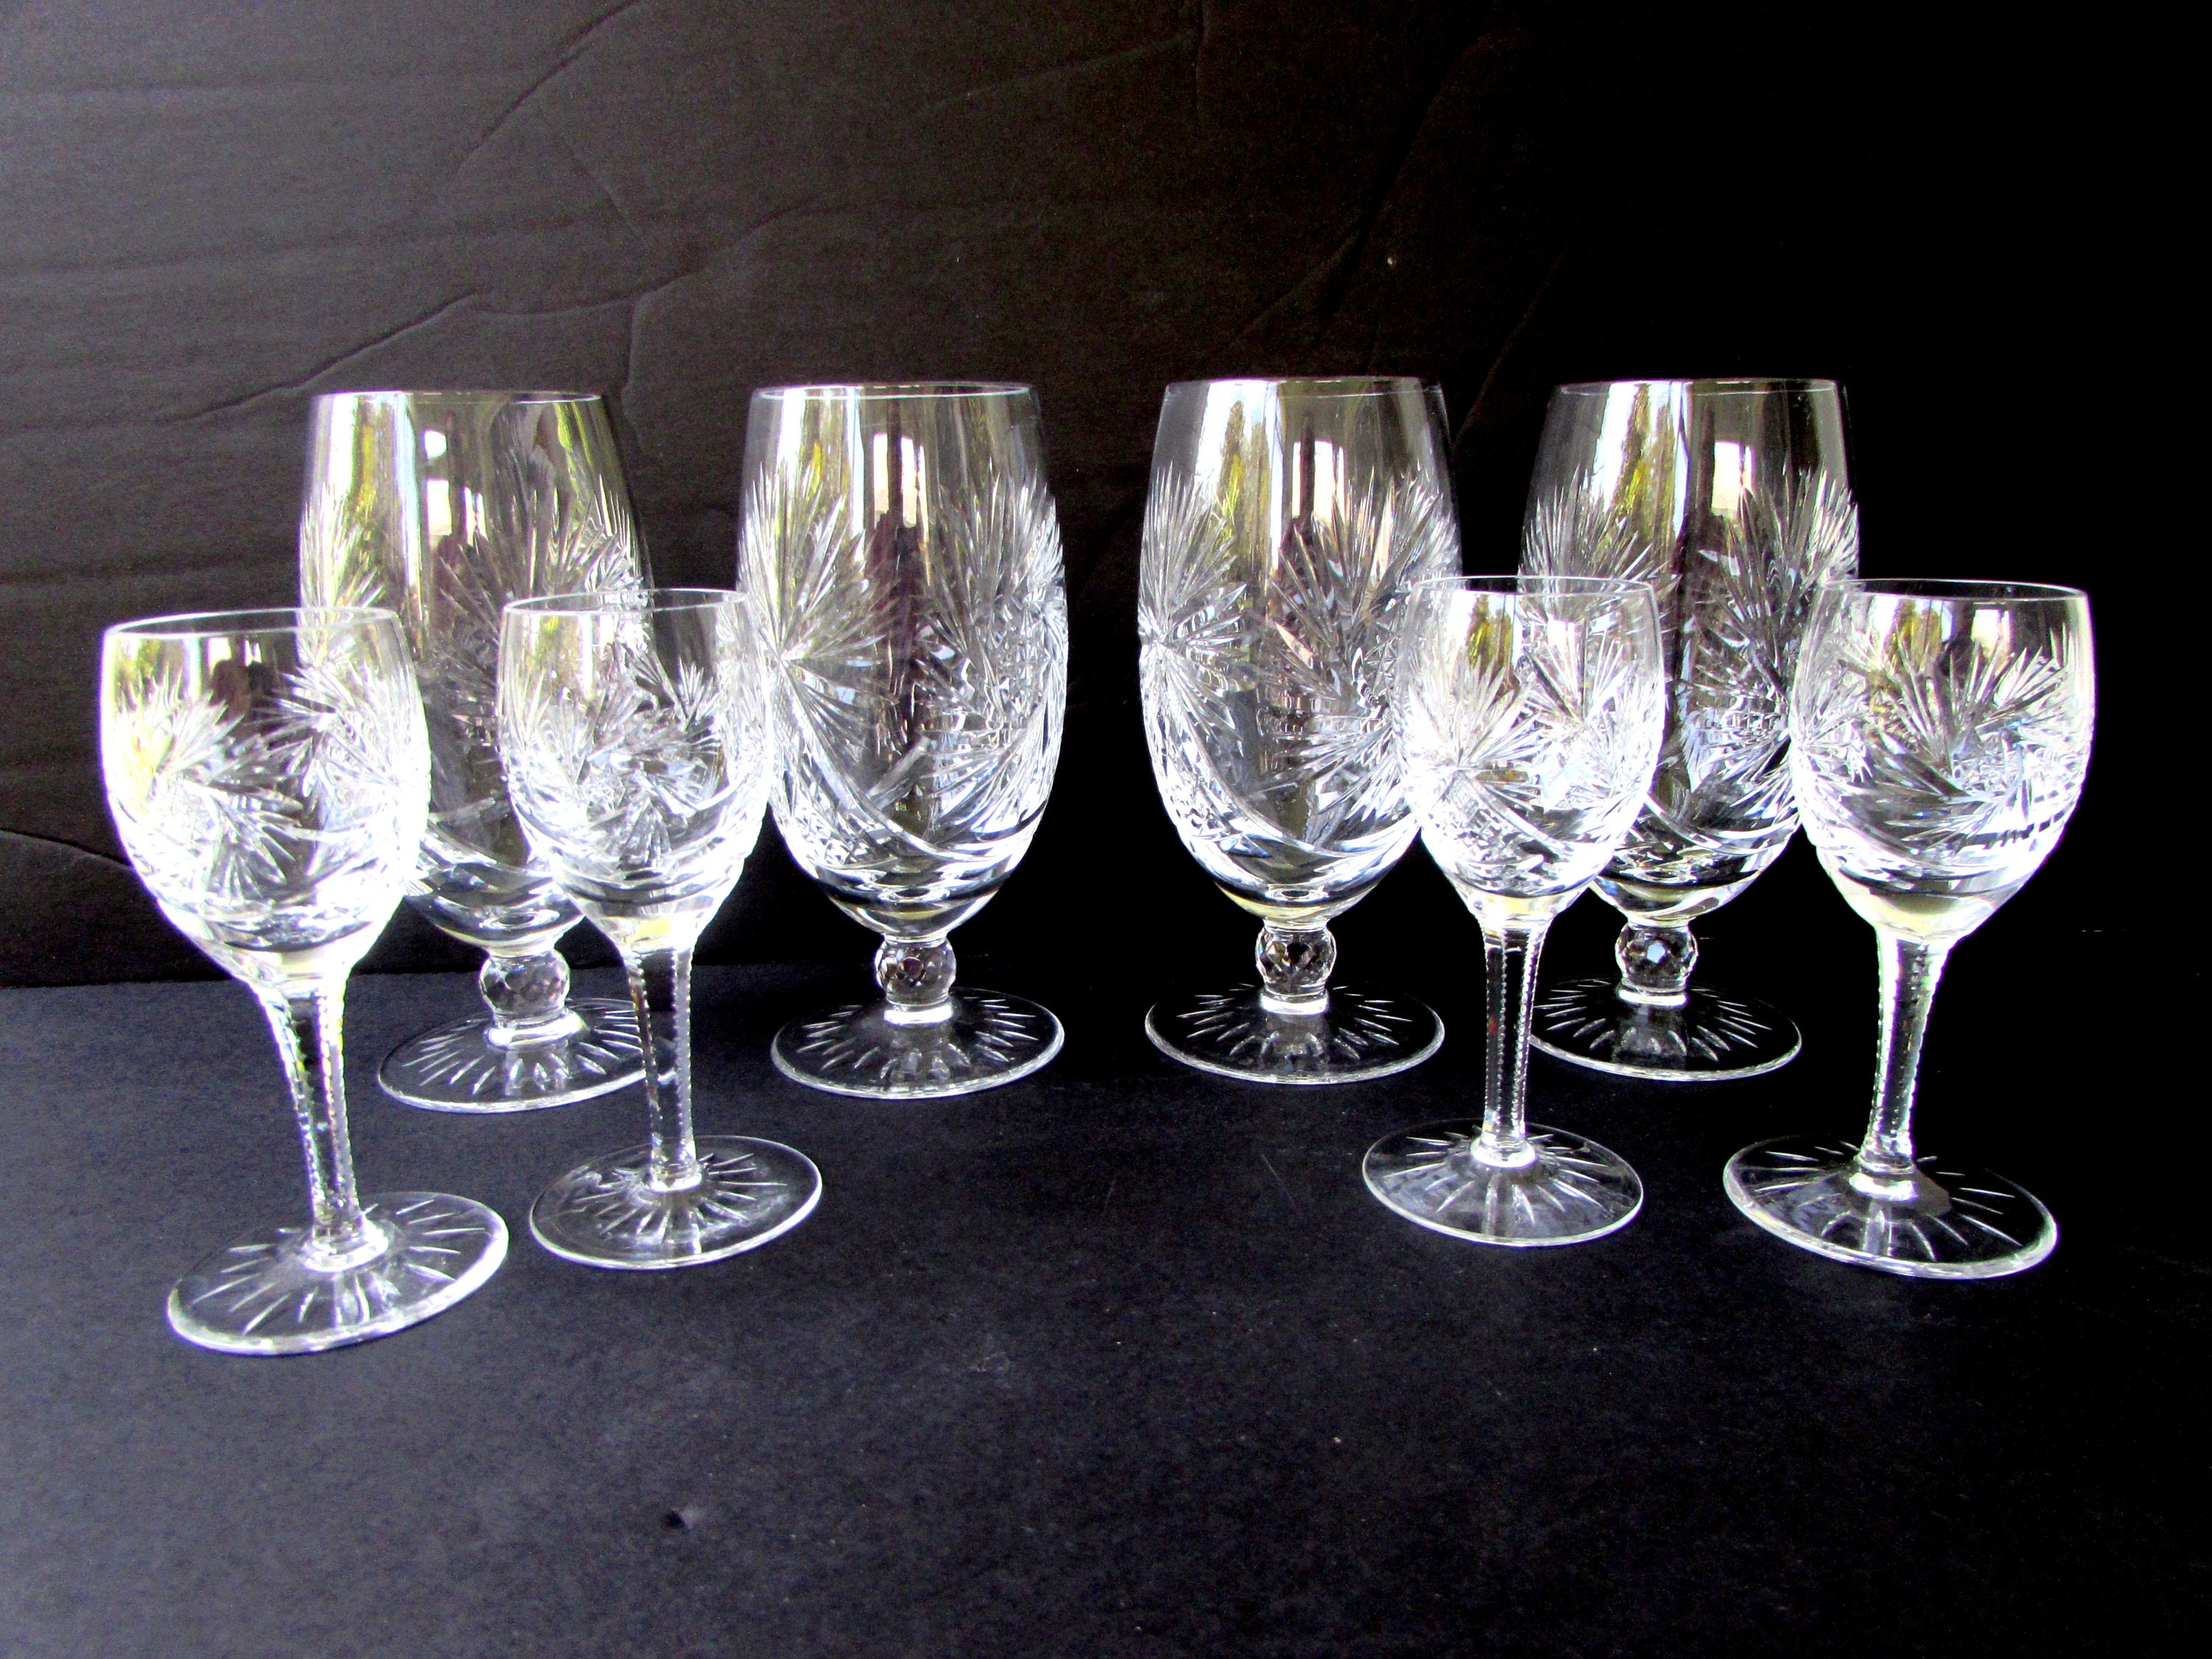 6 Pineapple Cut Crystal Wine Glasses Goblets with Fancy Stems